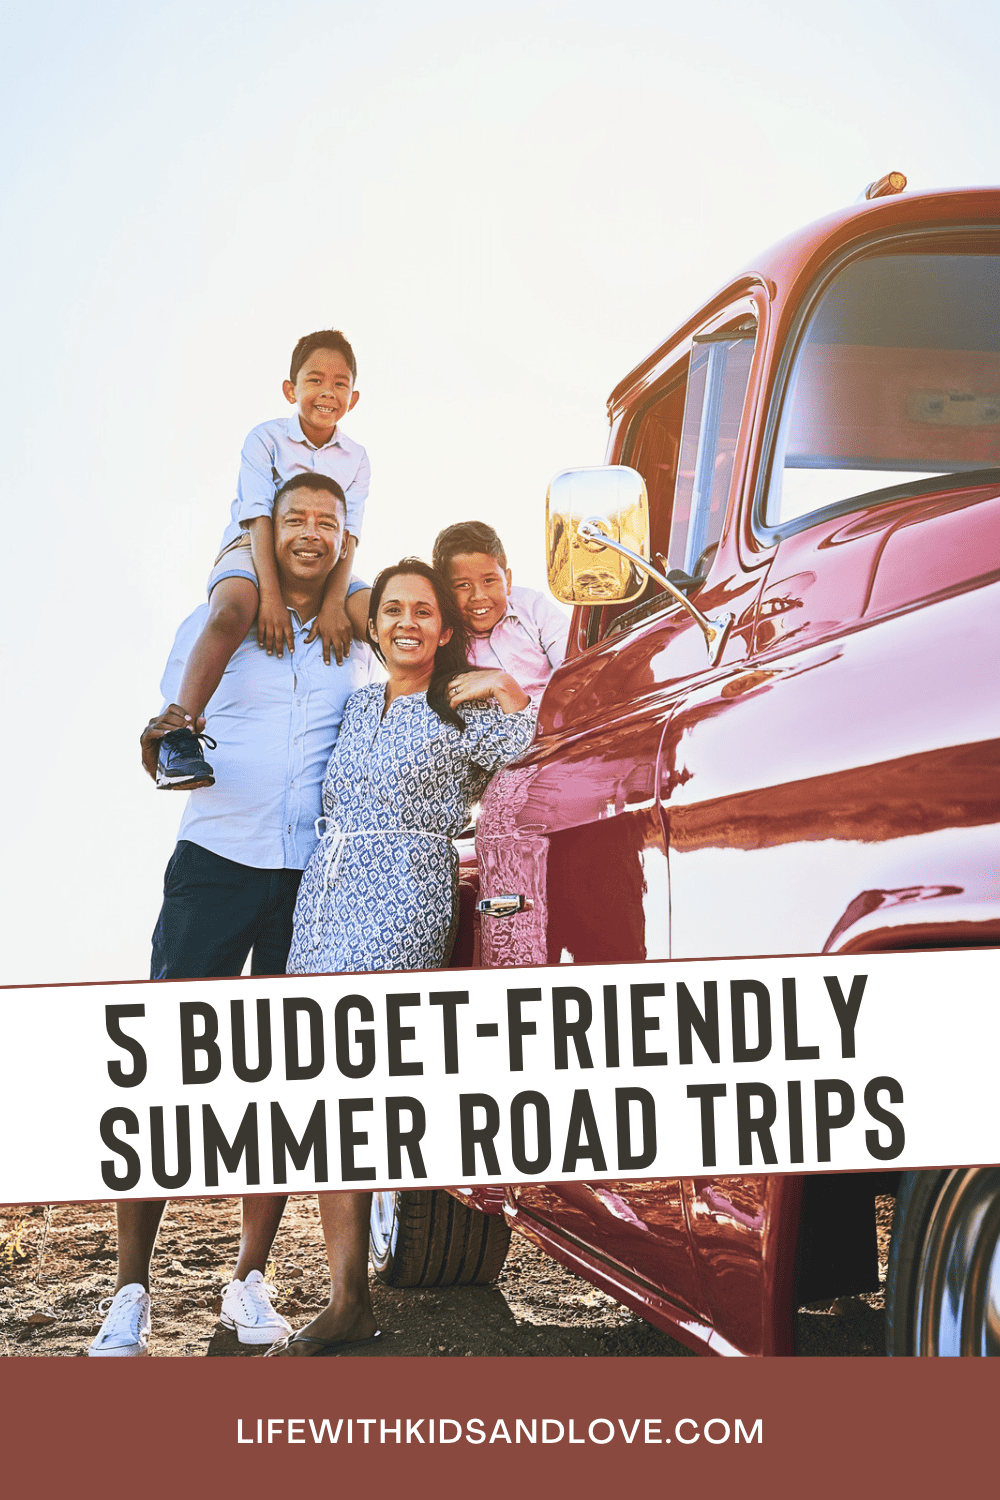 5 Budget-Friendly Summer Road Trips for Families